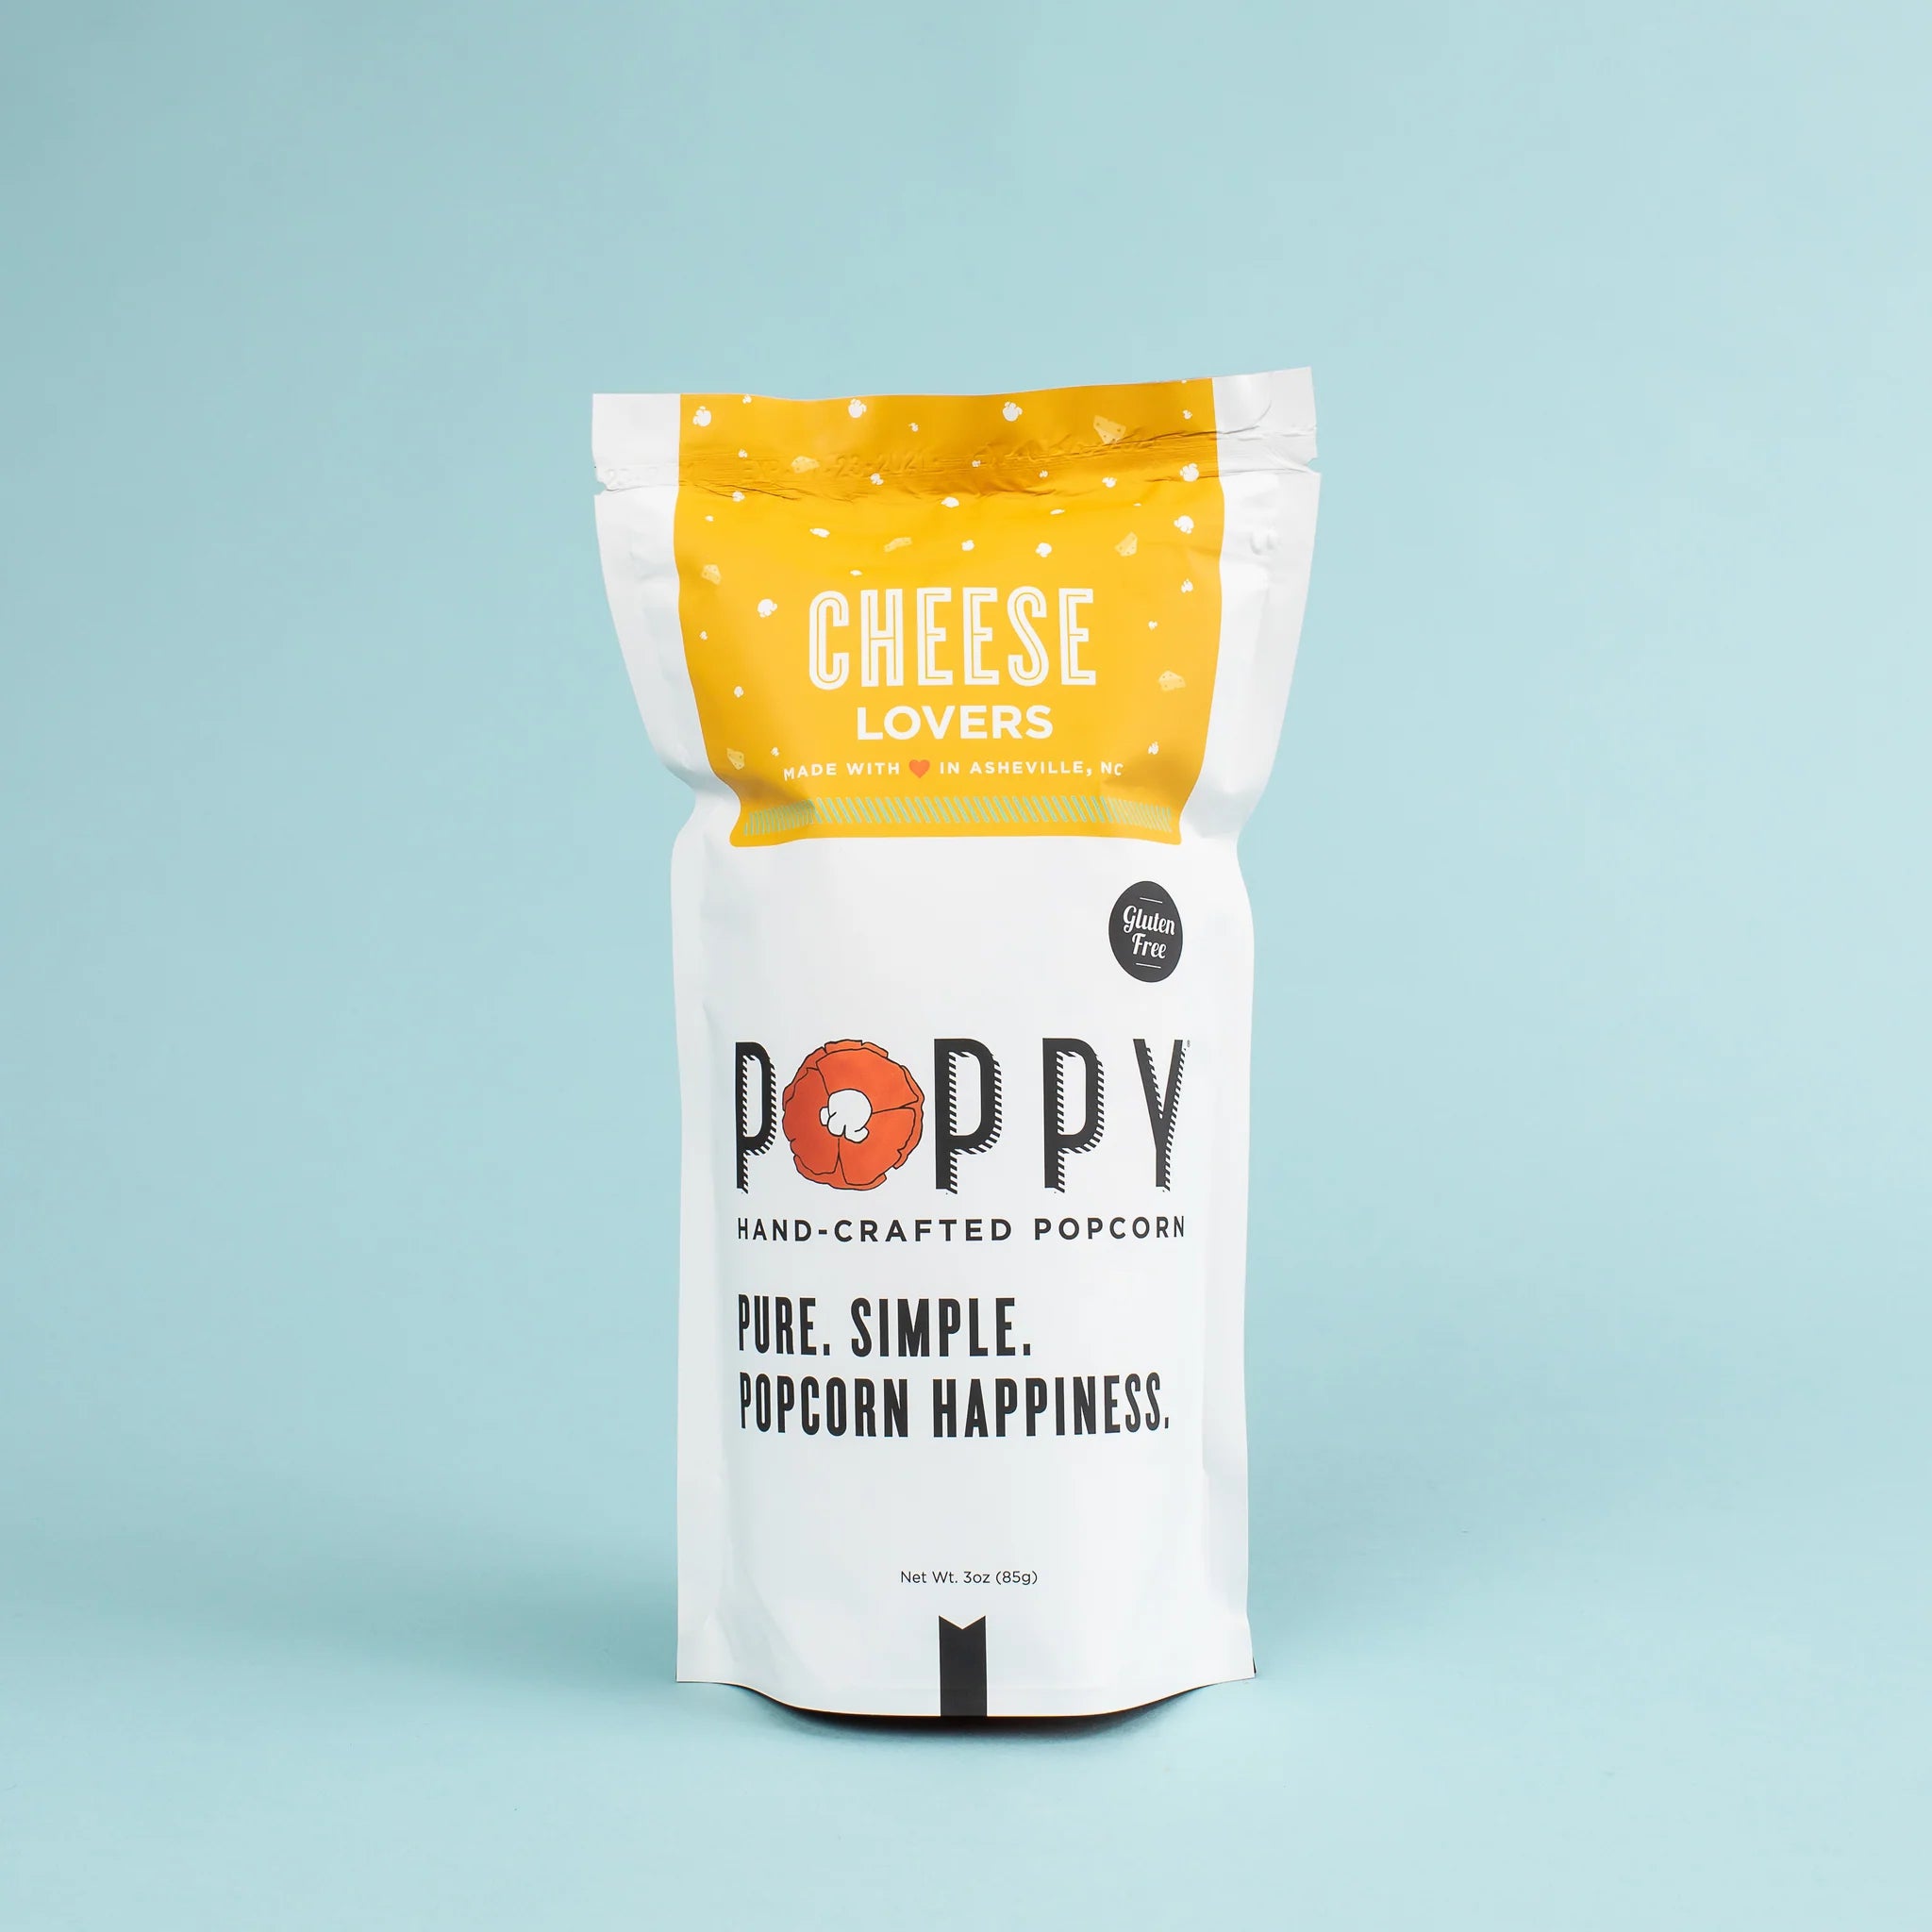 POPPY HANDCRAFTED POPCORN- Cheese Lovers